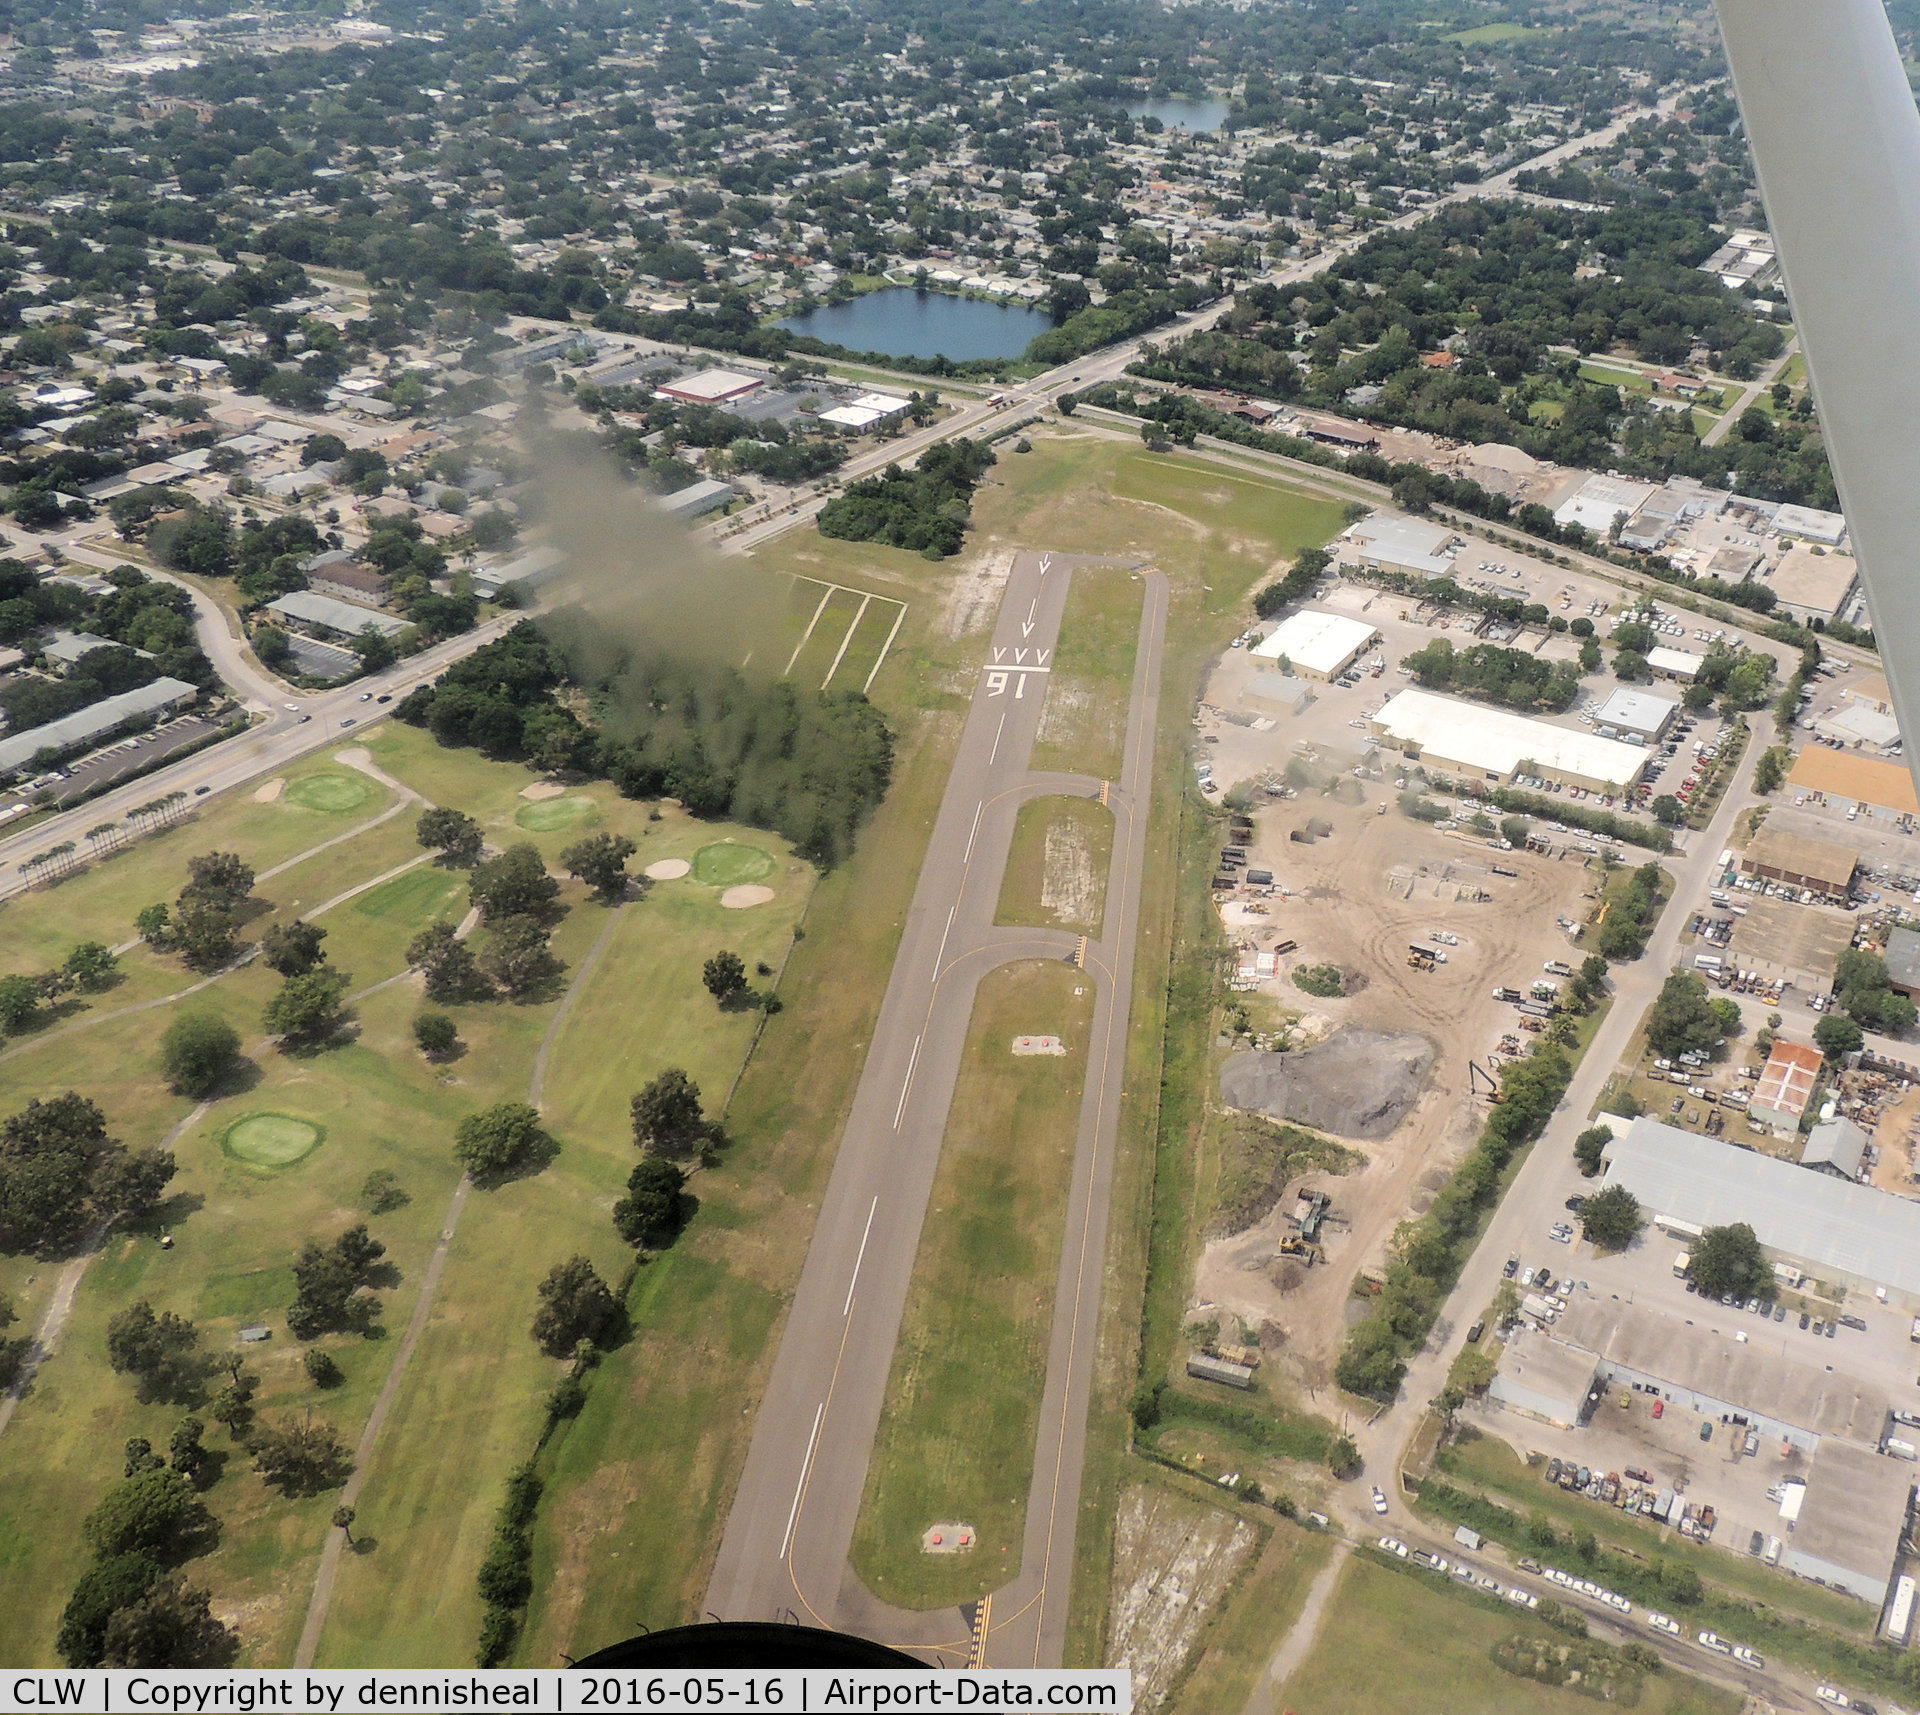 Clearwater Air Park Airport (CLW) - CLEARWATER AIR PARK AIRPORT, CLEARWATER FL